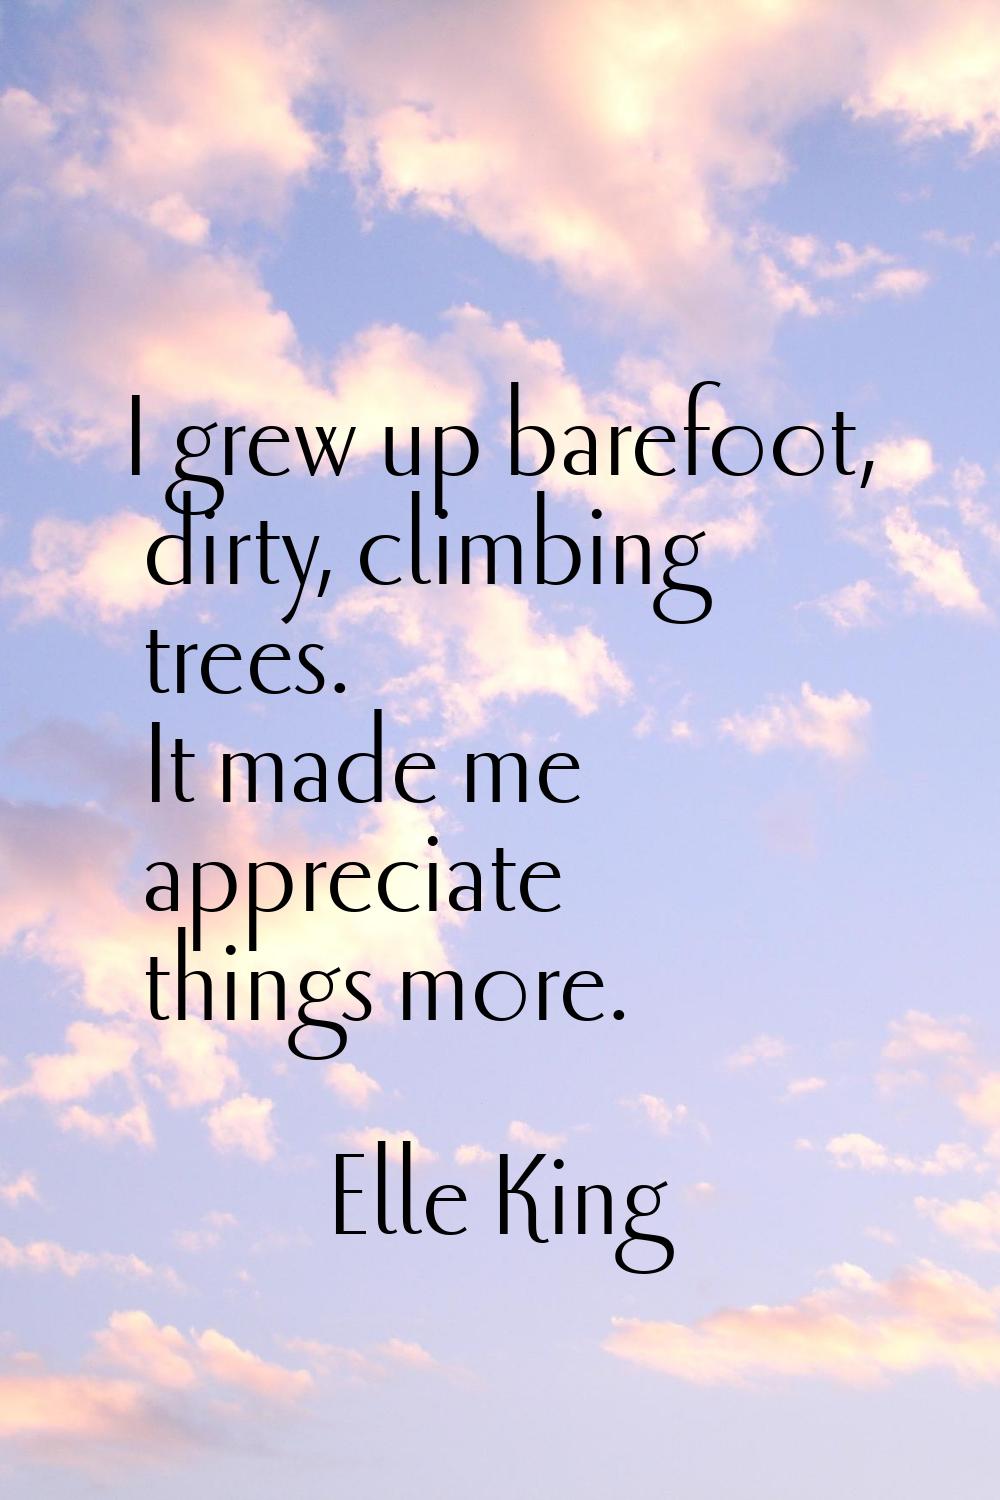 I grew up barefoot, dirty, climbing trees. It made me appreciate things more.